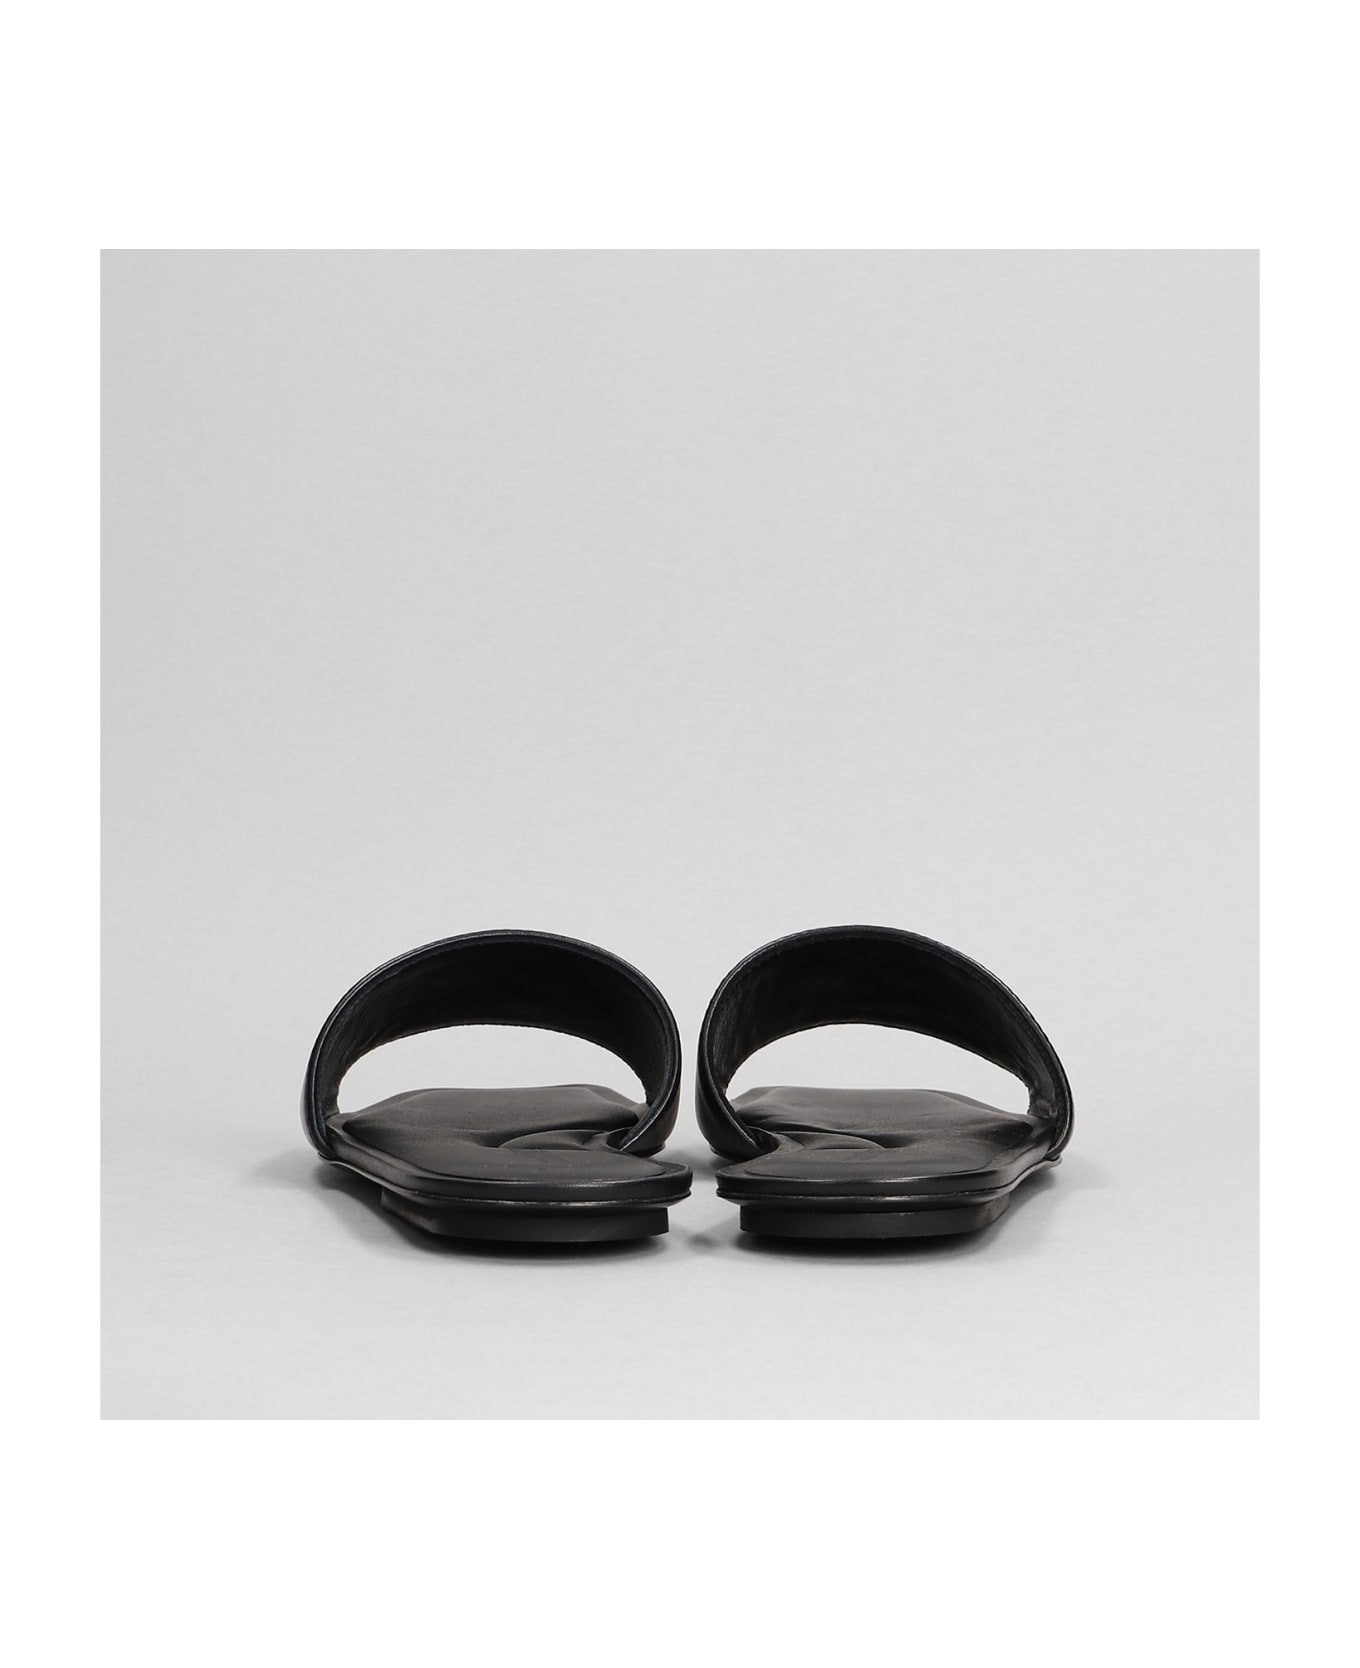 Courrèges Flats In Black Leather - Black サンダル